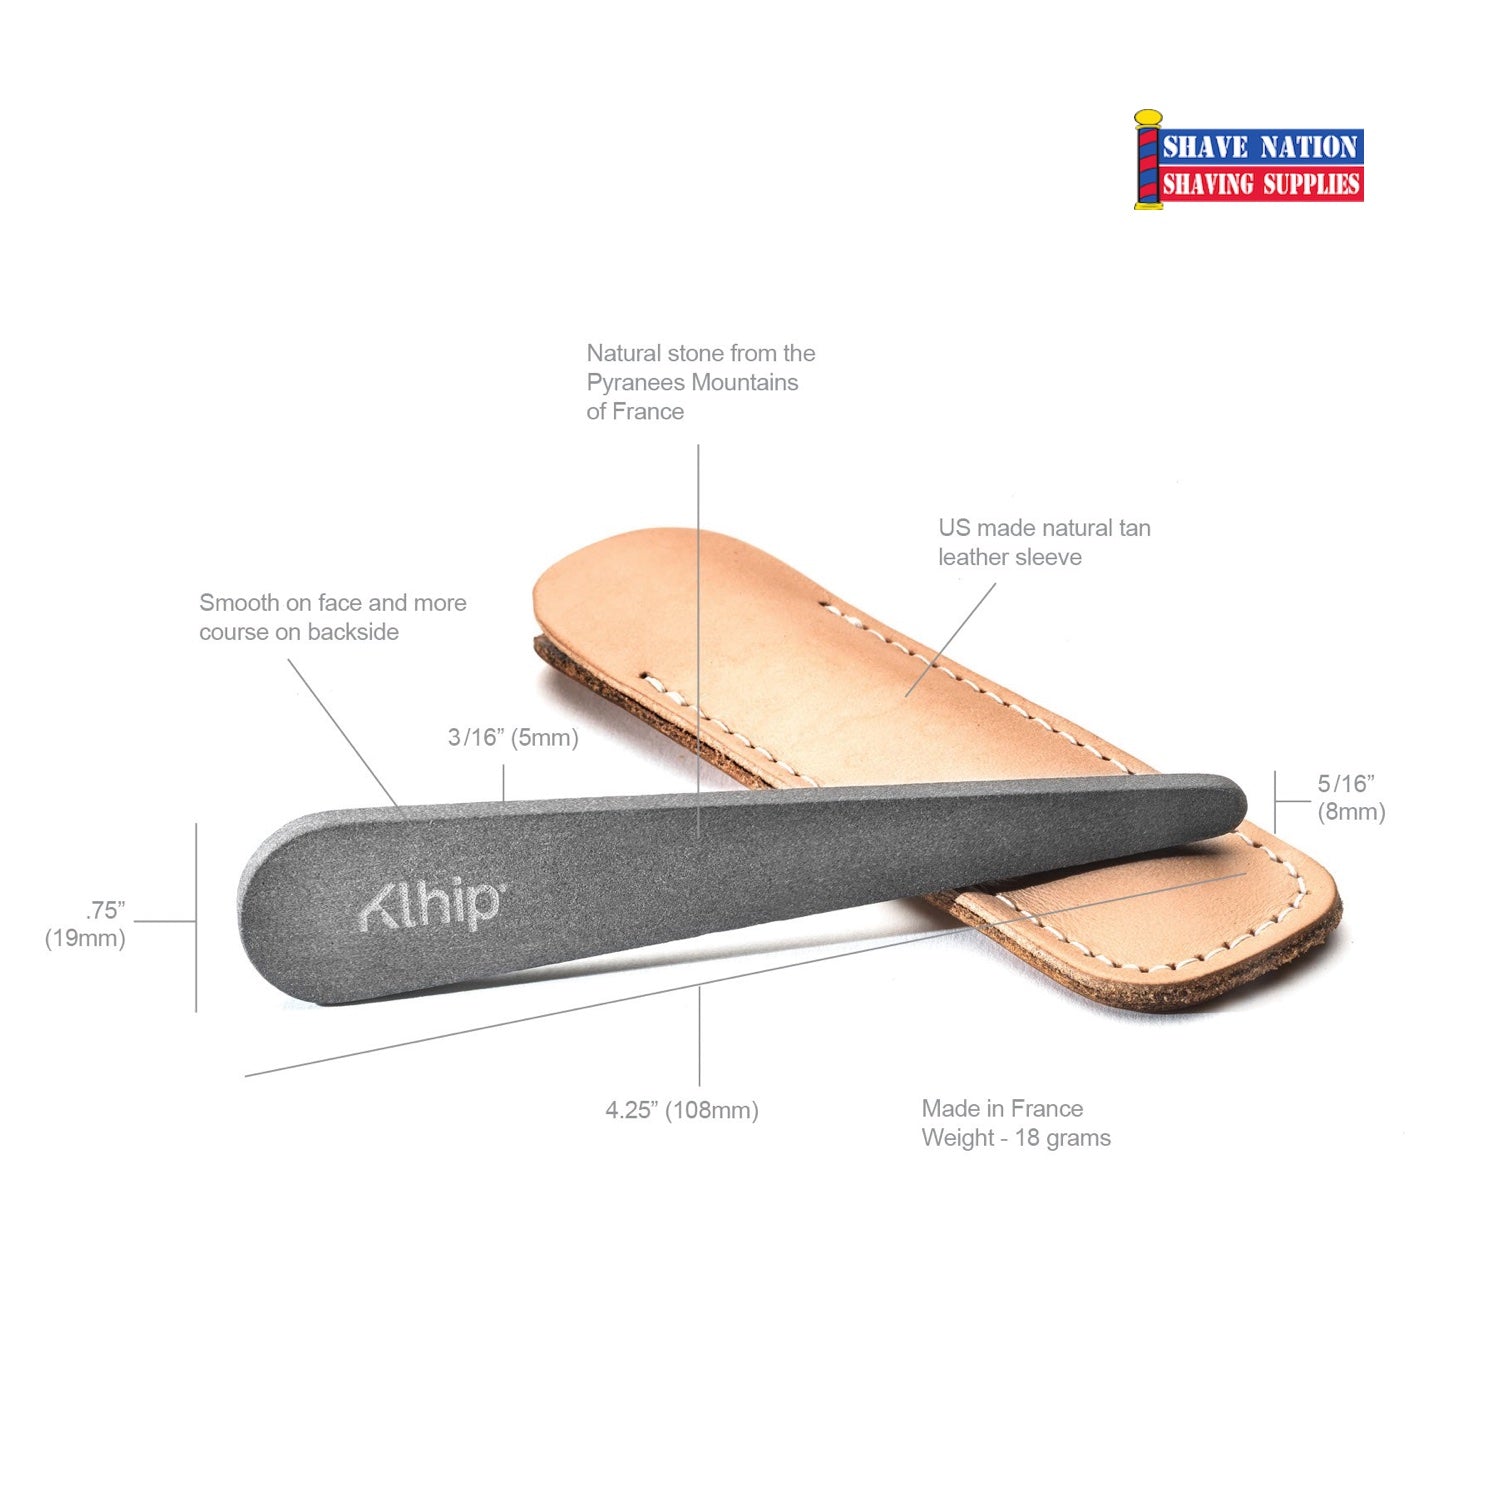 Klhip Stone Nail File with Leather Case